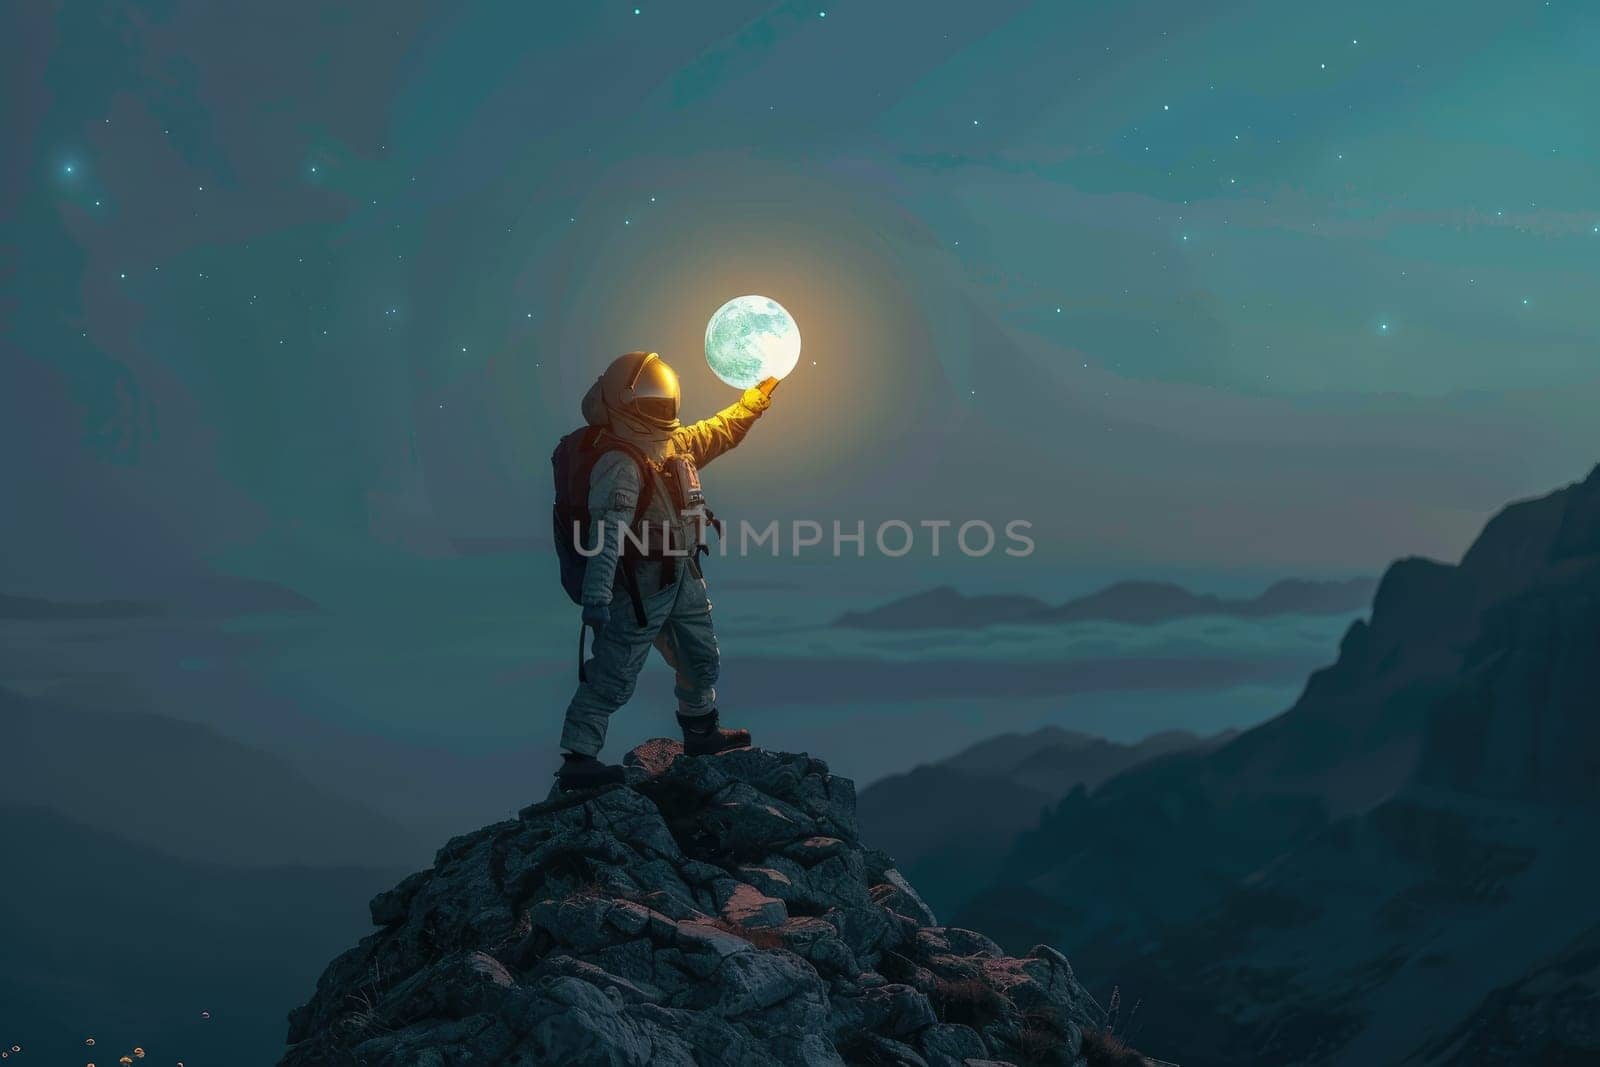 Space suit, standing on top of a mountain, reaching out to touch the full moon.